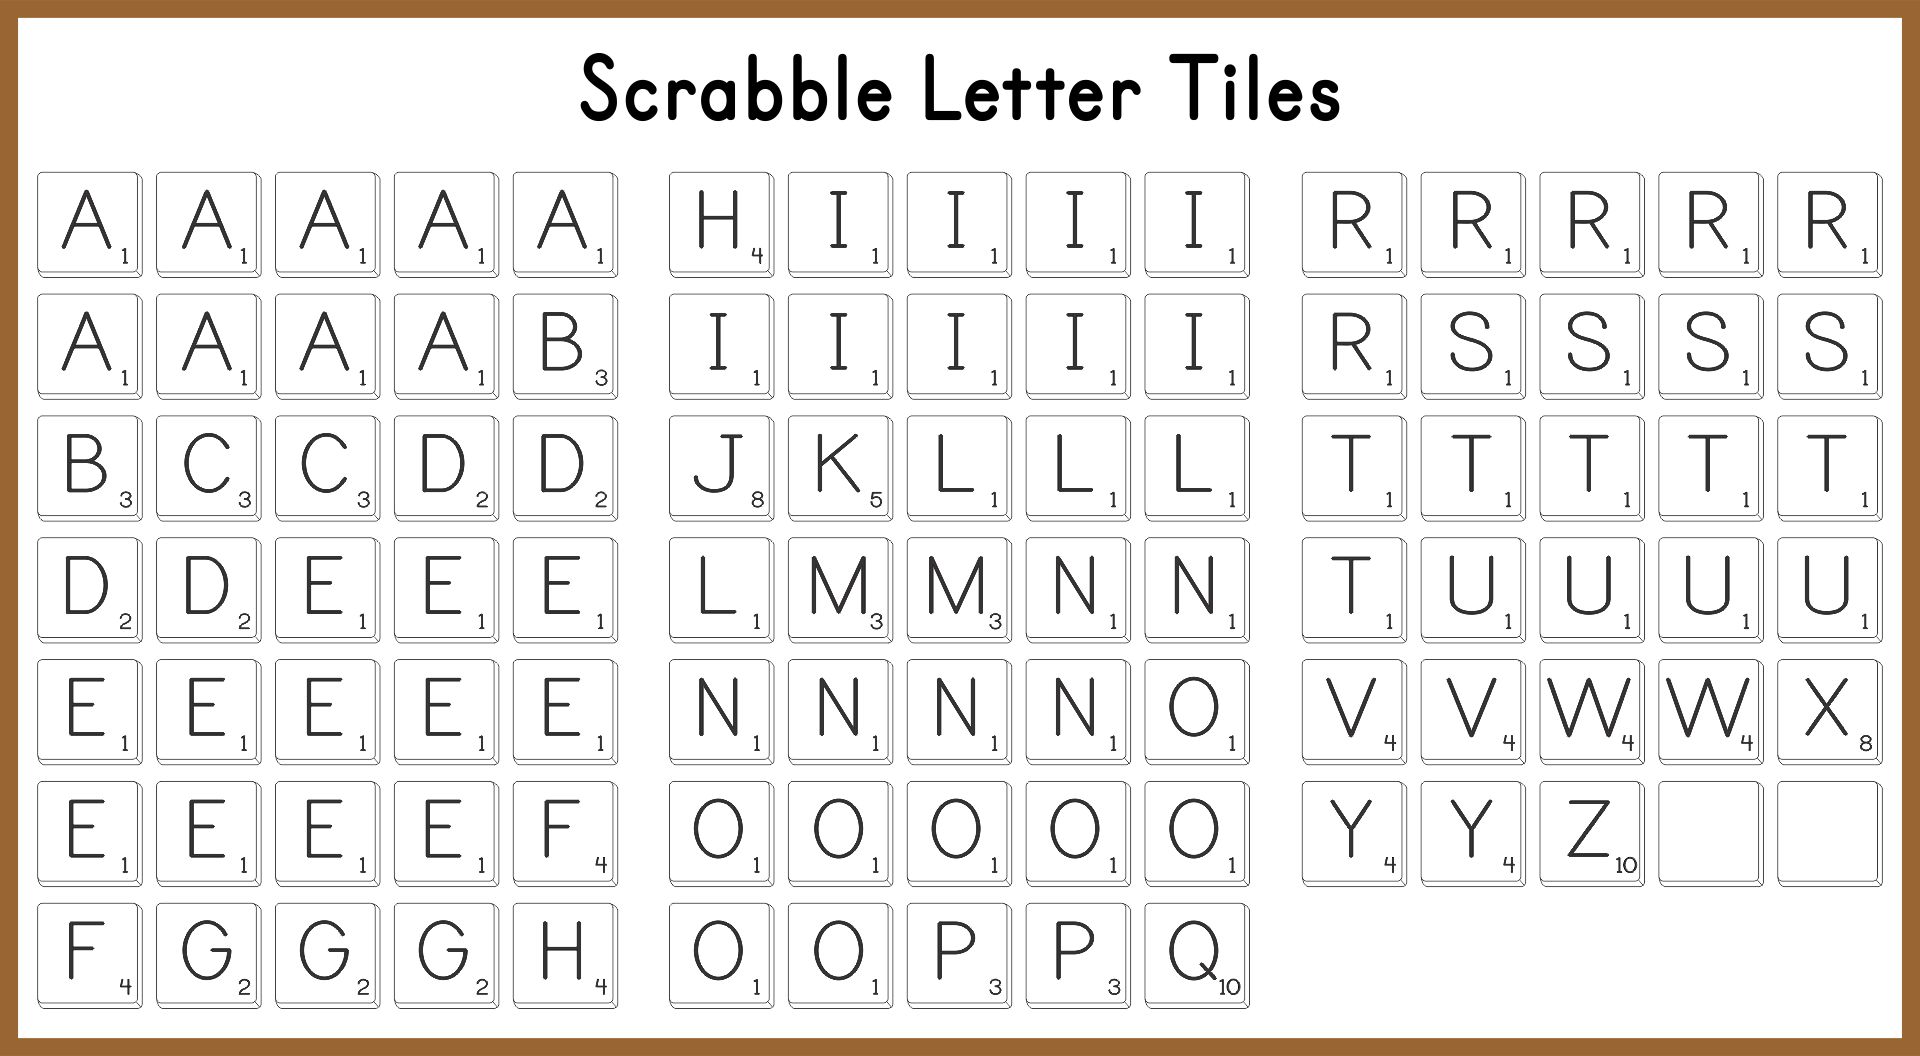 scrabble word finder with blanks